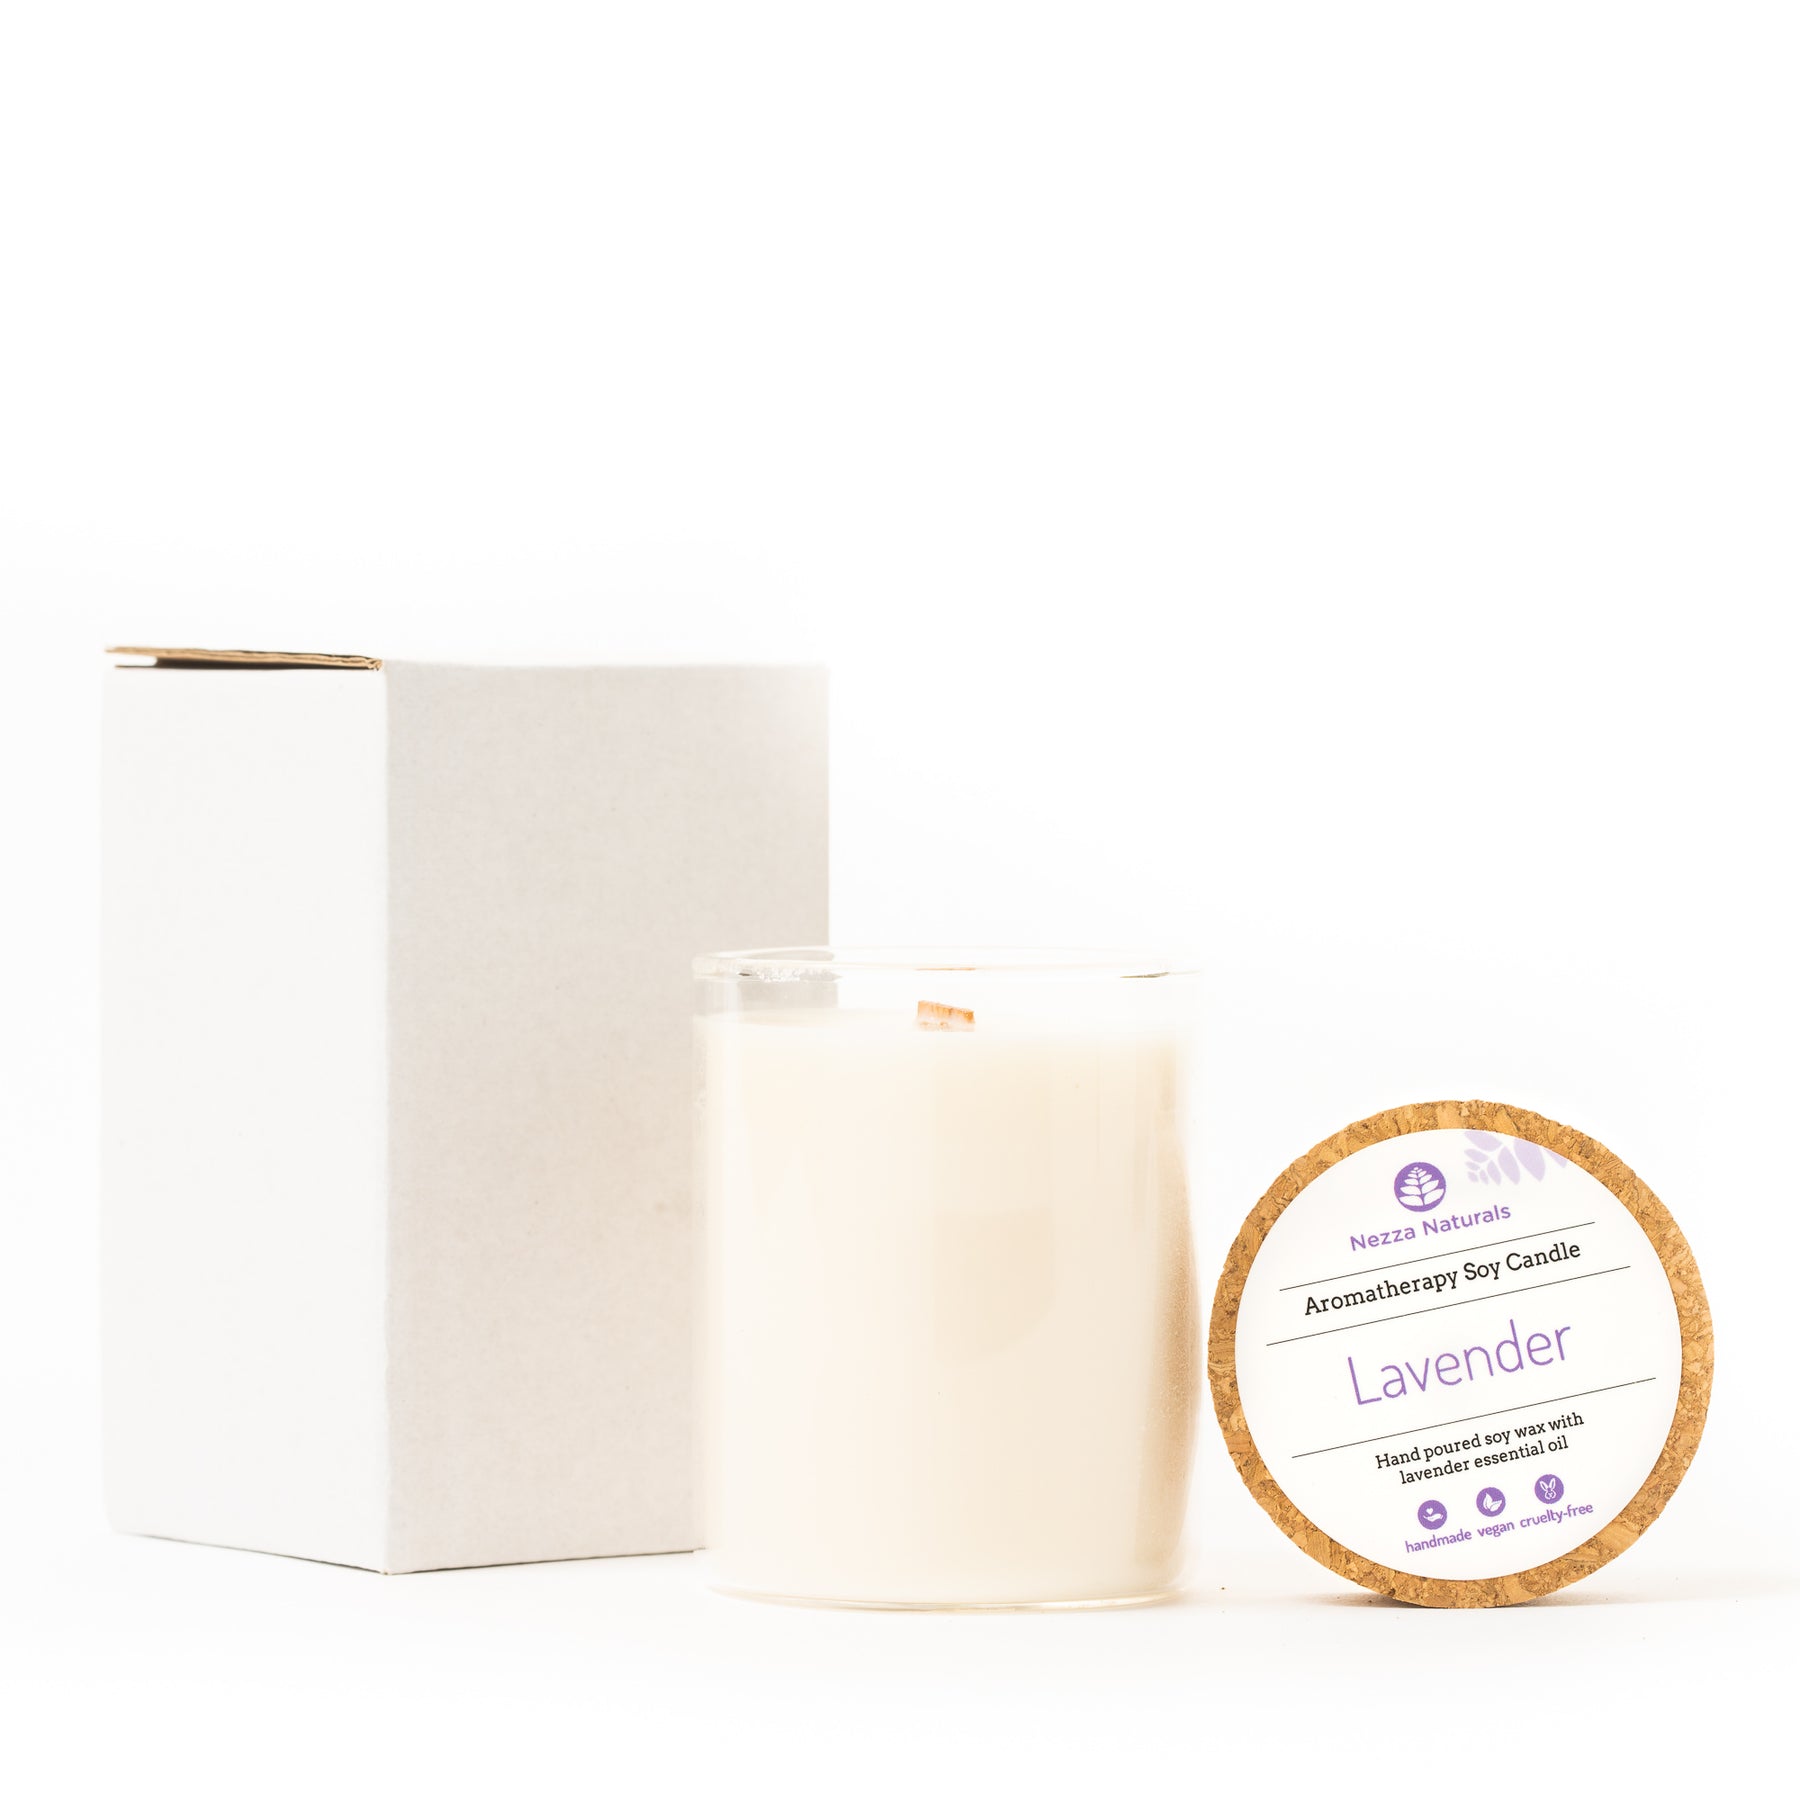 Aromatherapy Soy Candle in Lavender